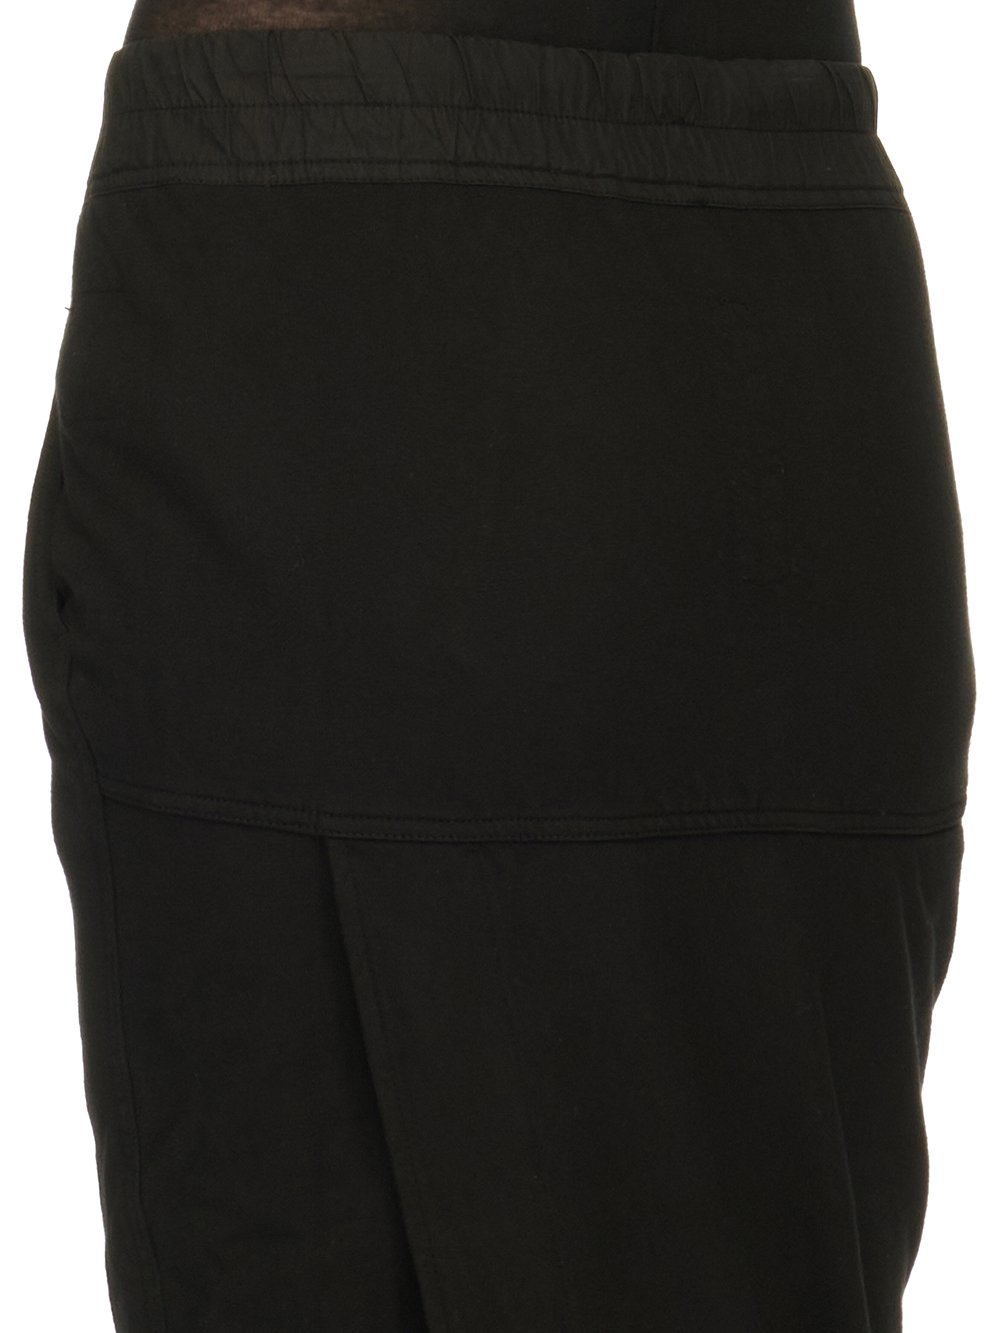 DRKSHDW FW23 LUXOR PULL ON PILLAR SKIRT IN BLACK COMPACT HEAVY COTTON JERSEY